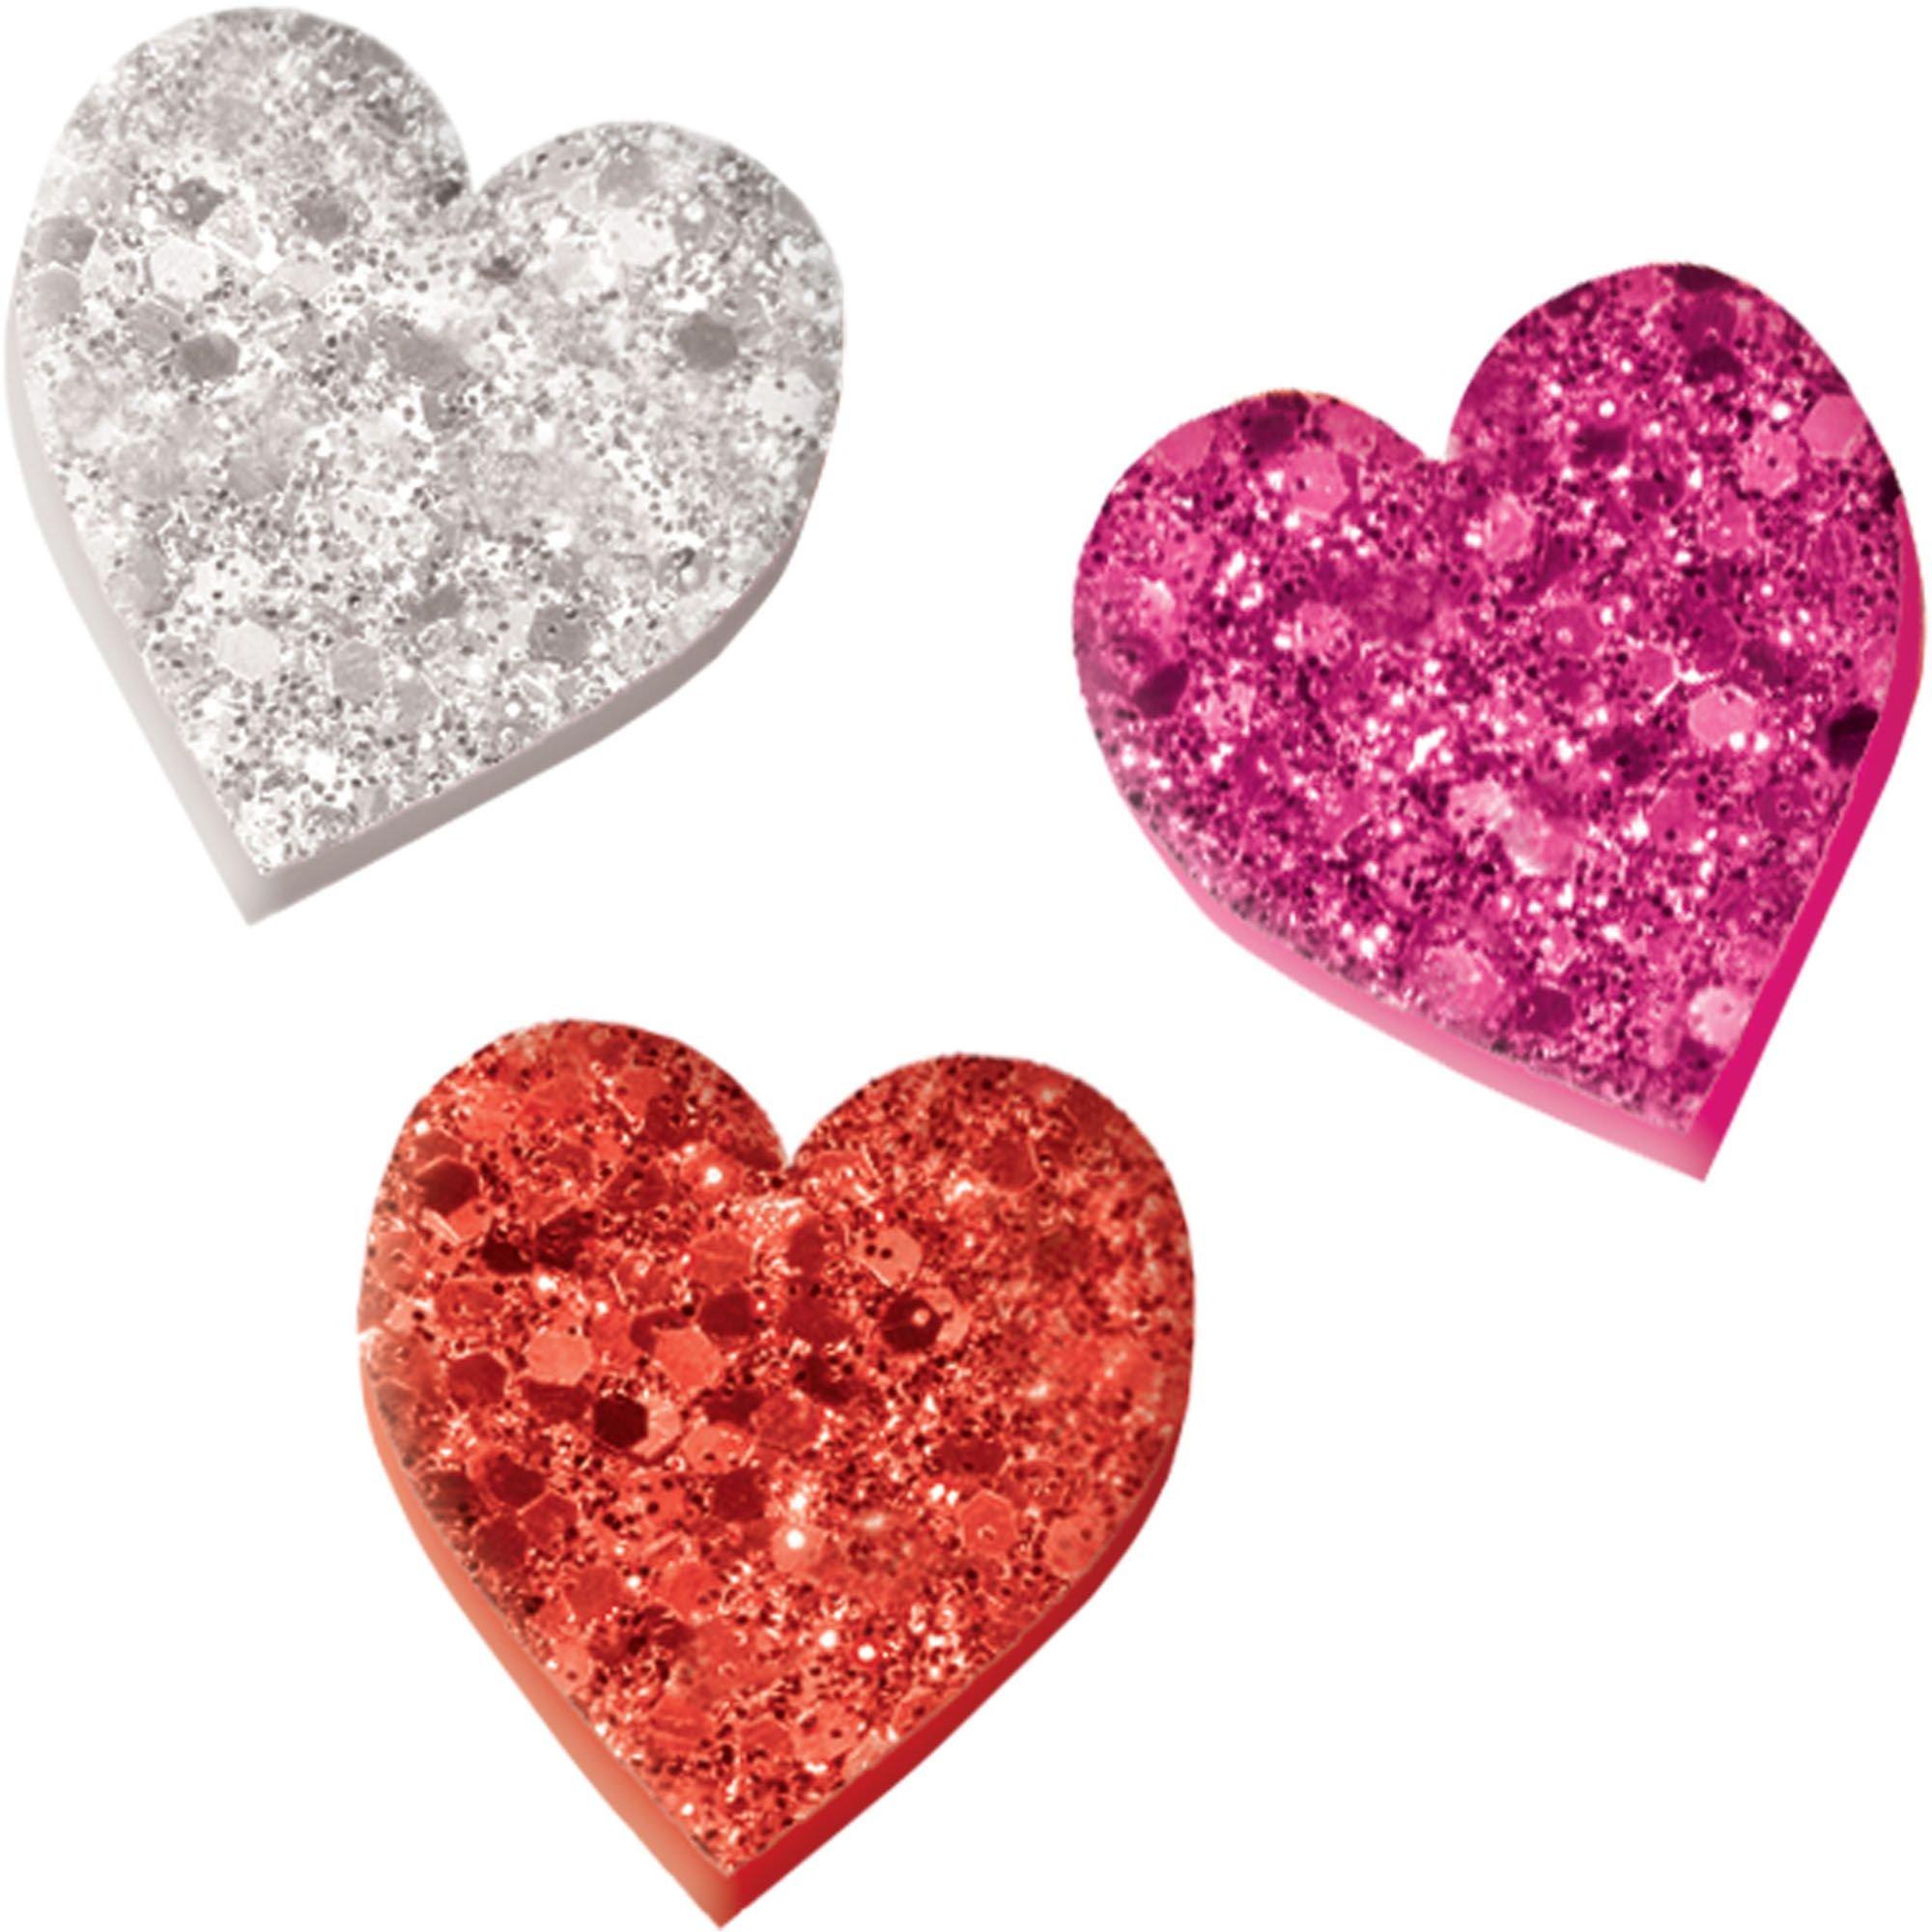 Pink & Red Valentine's Day Hearts Foil Sticker Sheets, 6ct